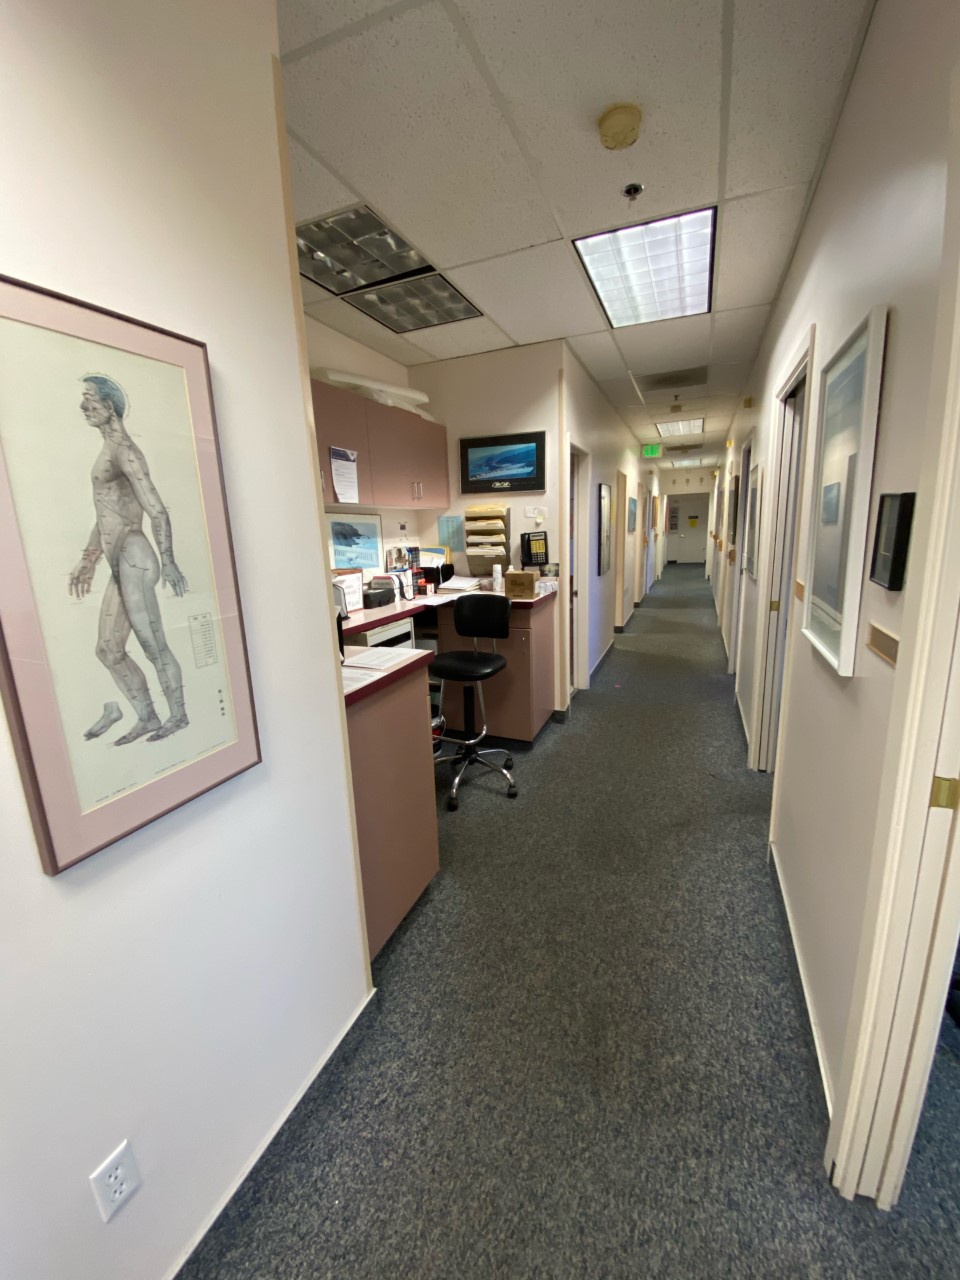 California Rehabilitation and Sports Therapy 
127 Hospital Drive
Vallejo